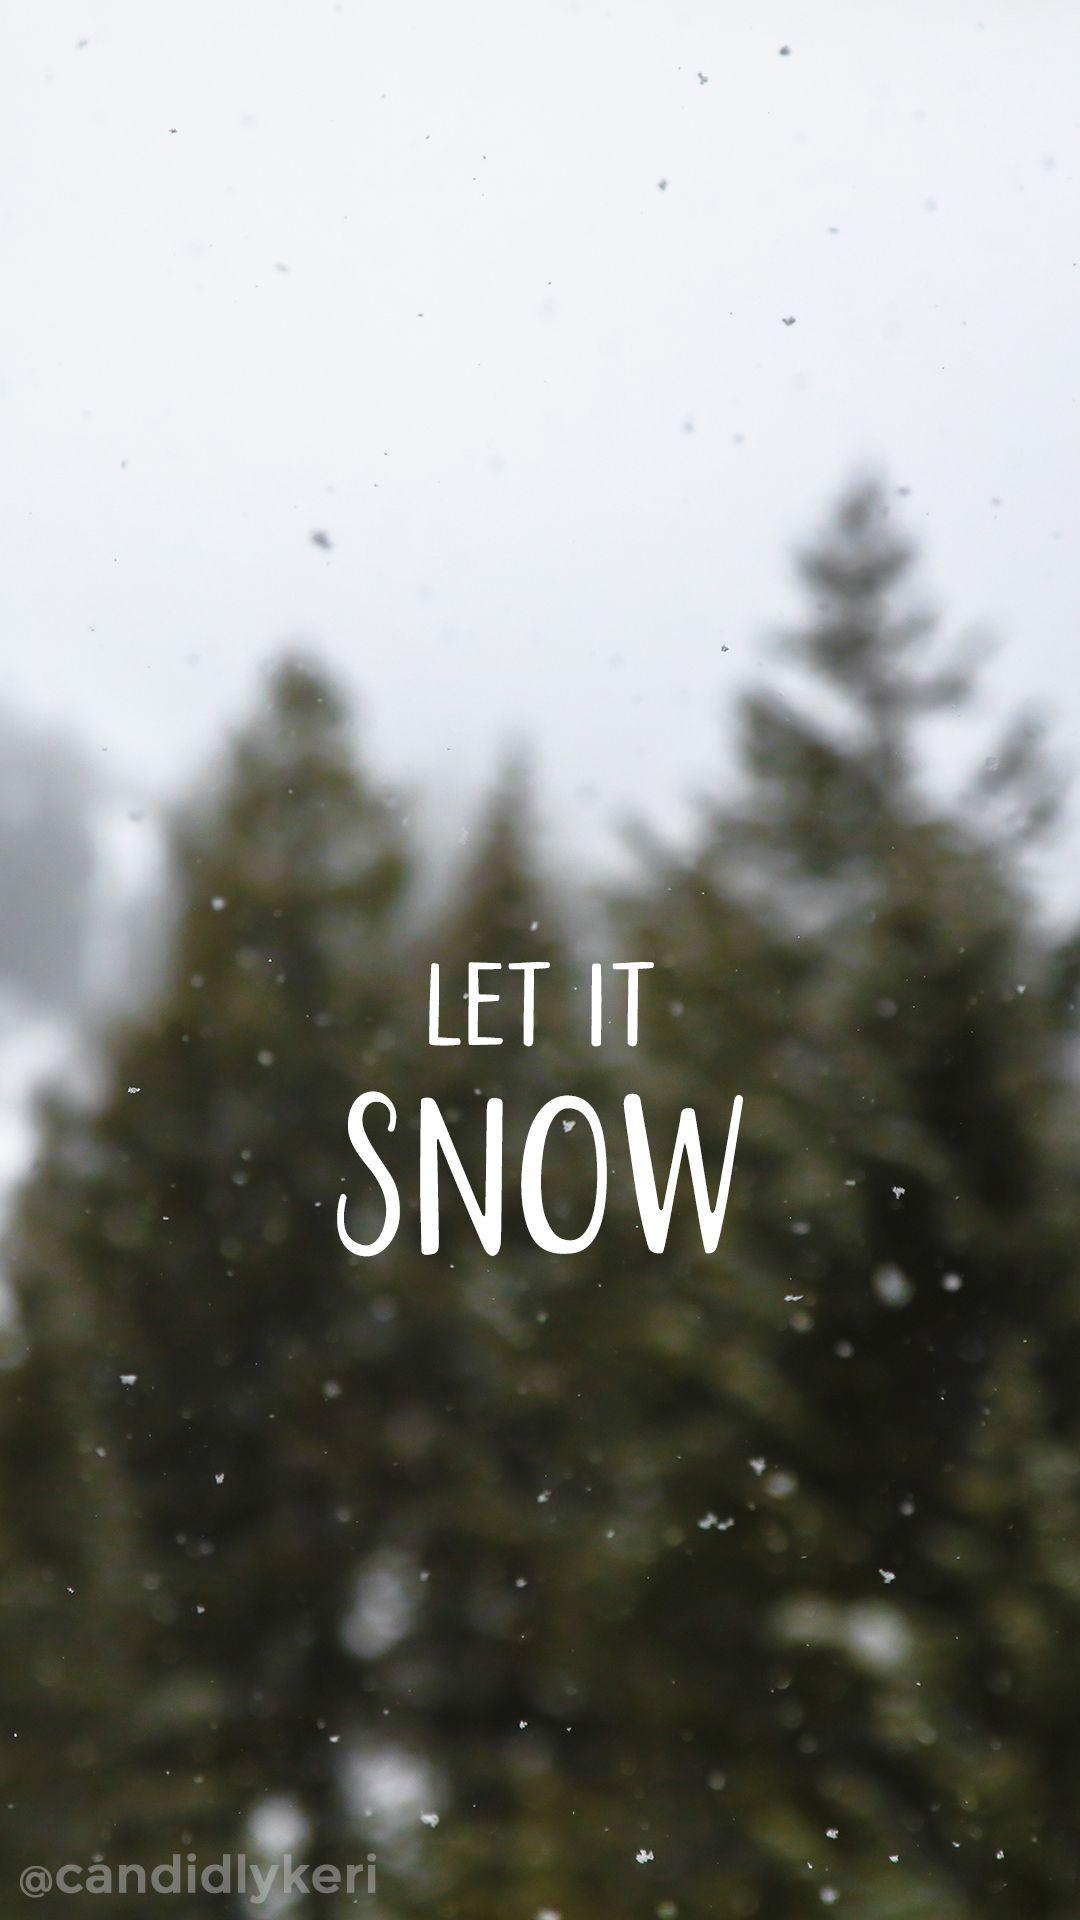 Let it snow, snow nature background wallpaper you can